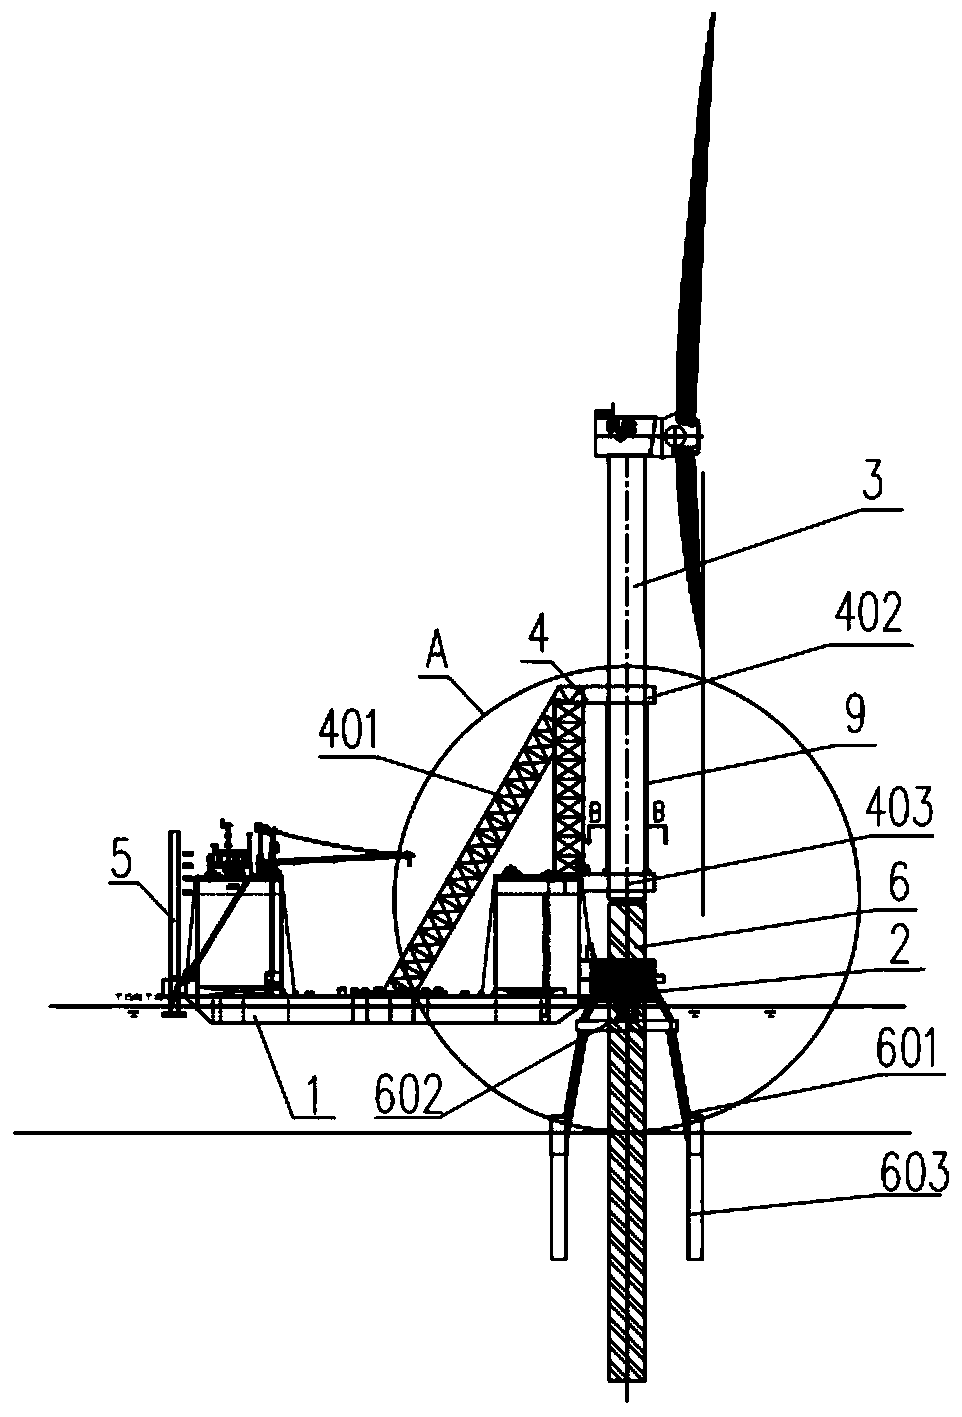 Novel offshore wind turbine integral transportation and installation device and method